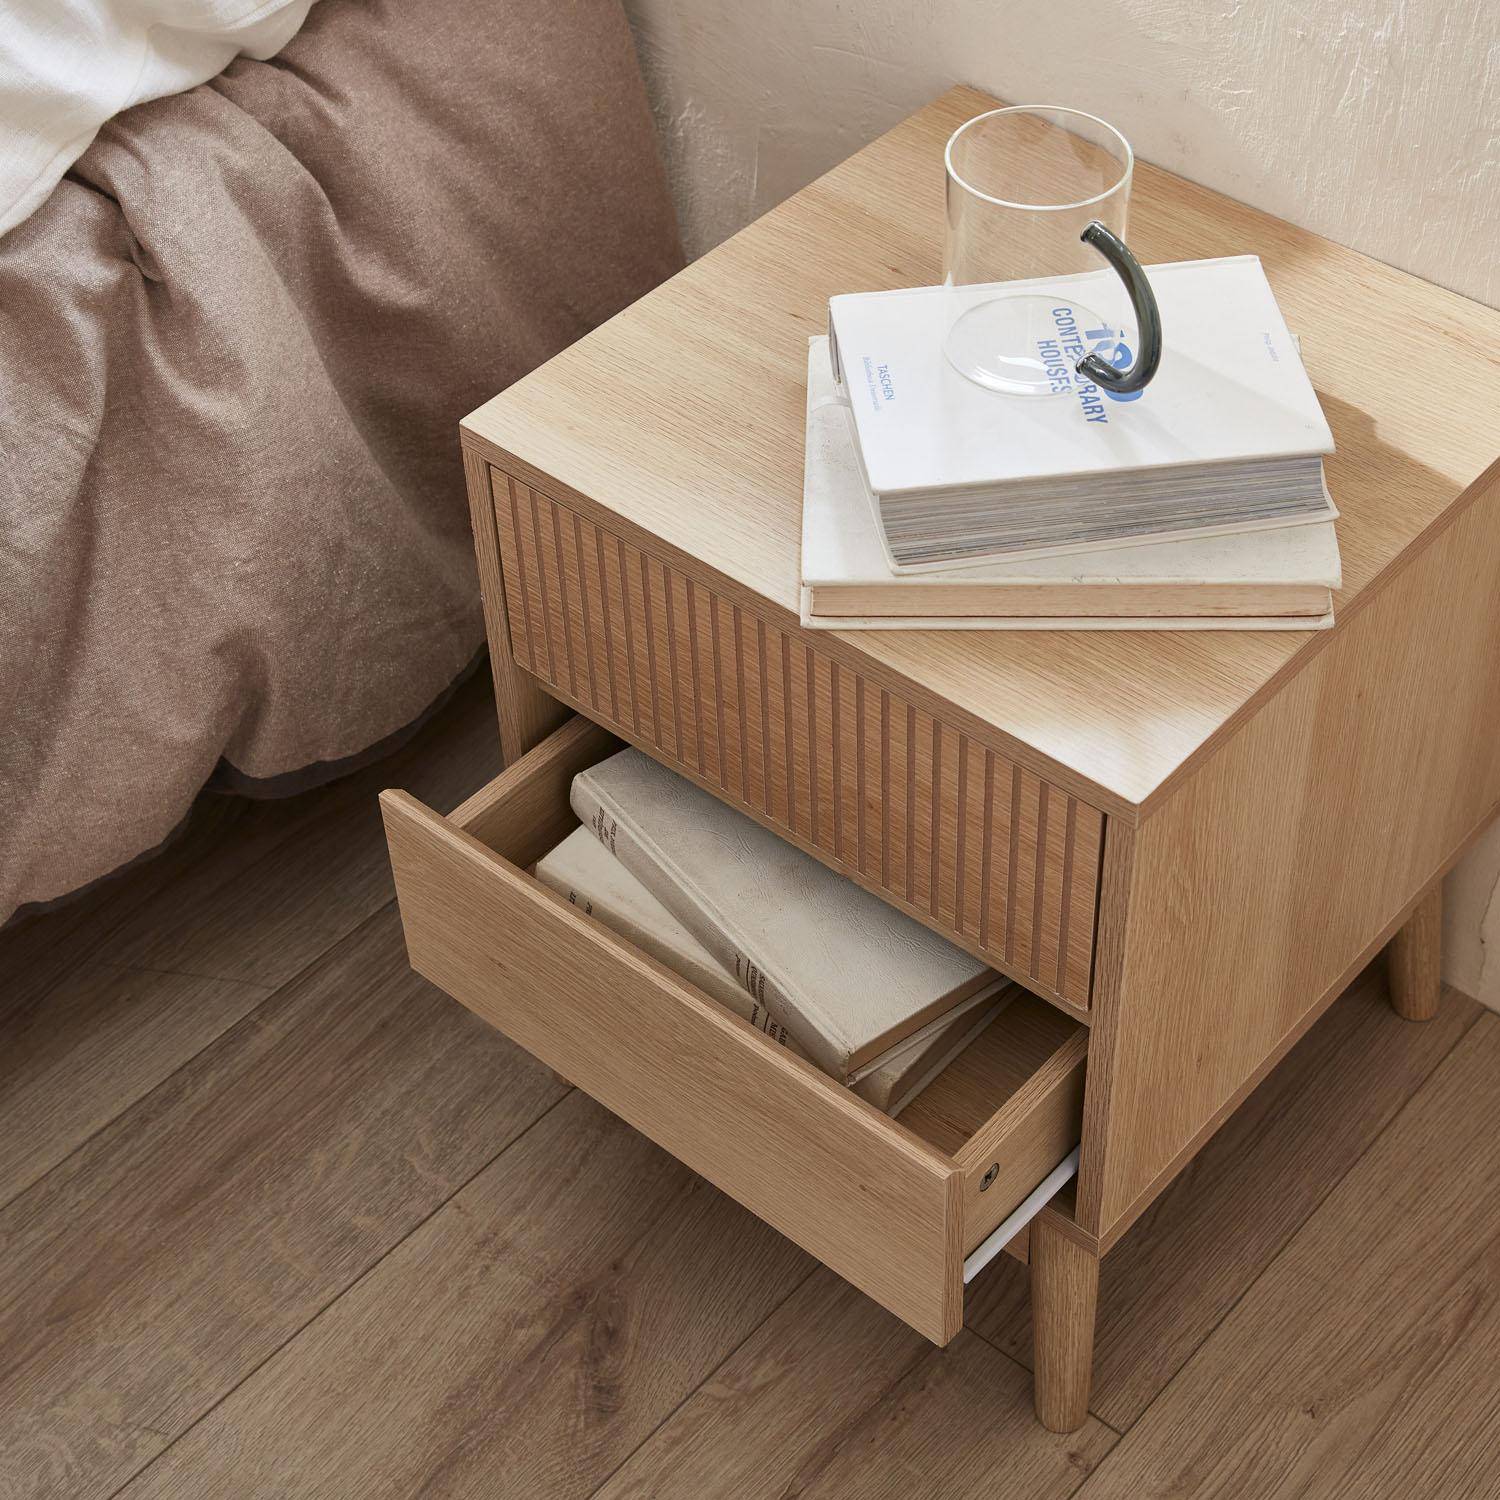 Grooved wooden bedside table with 2 drawers, 40x39x48cm, Linear - Natural Wood colour Photo2